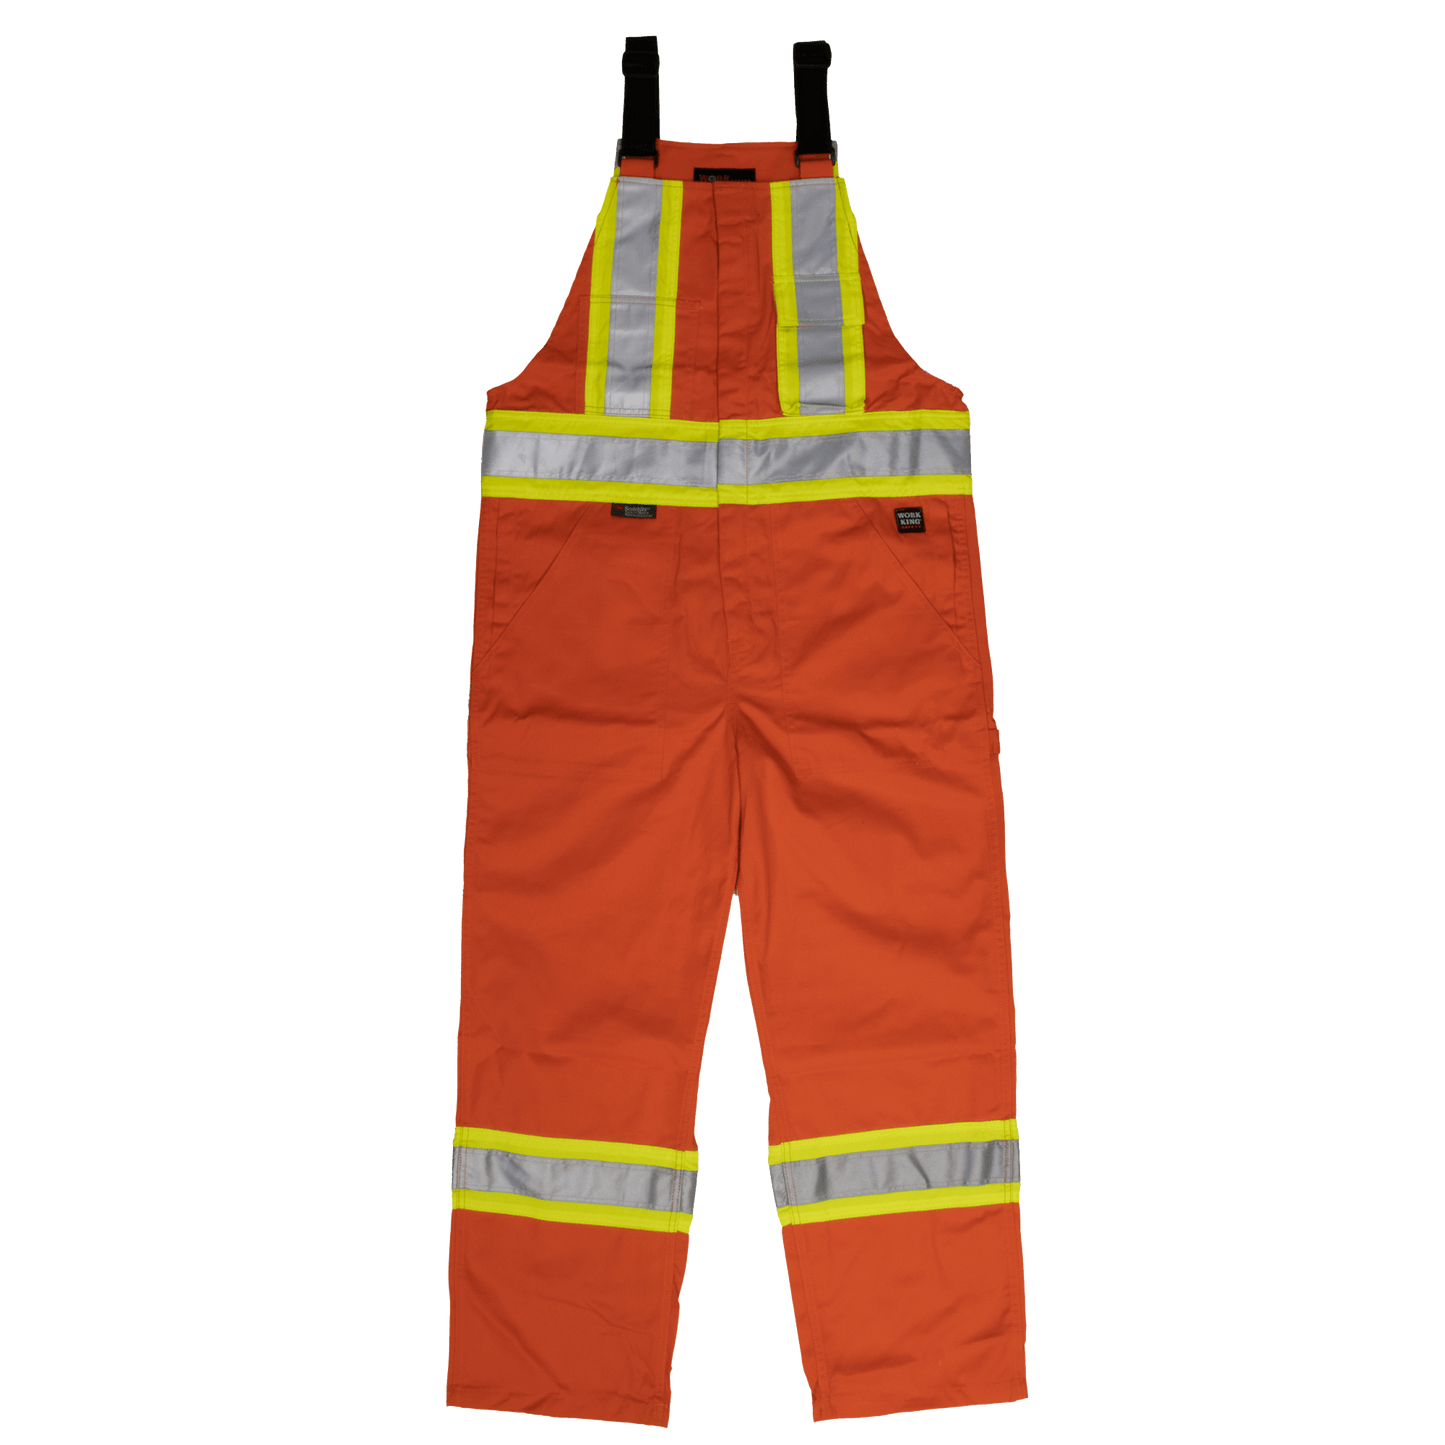 Unlined Safety Overall